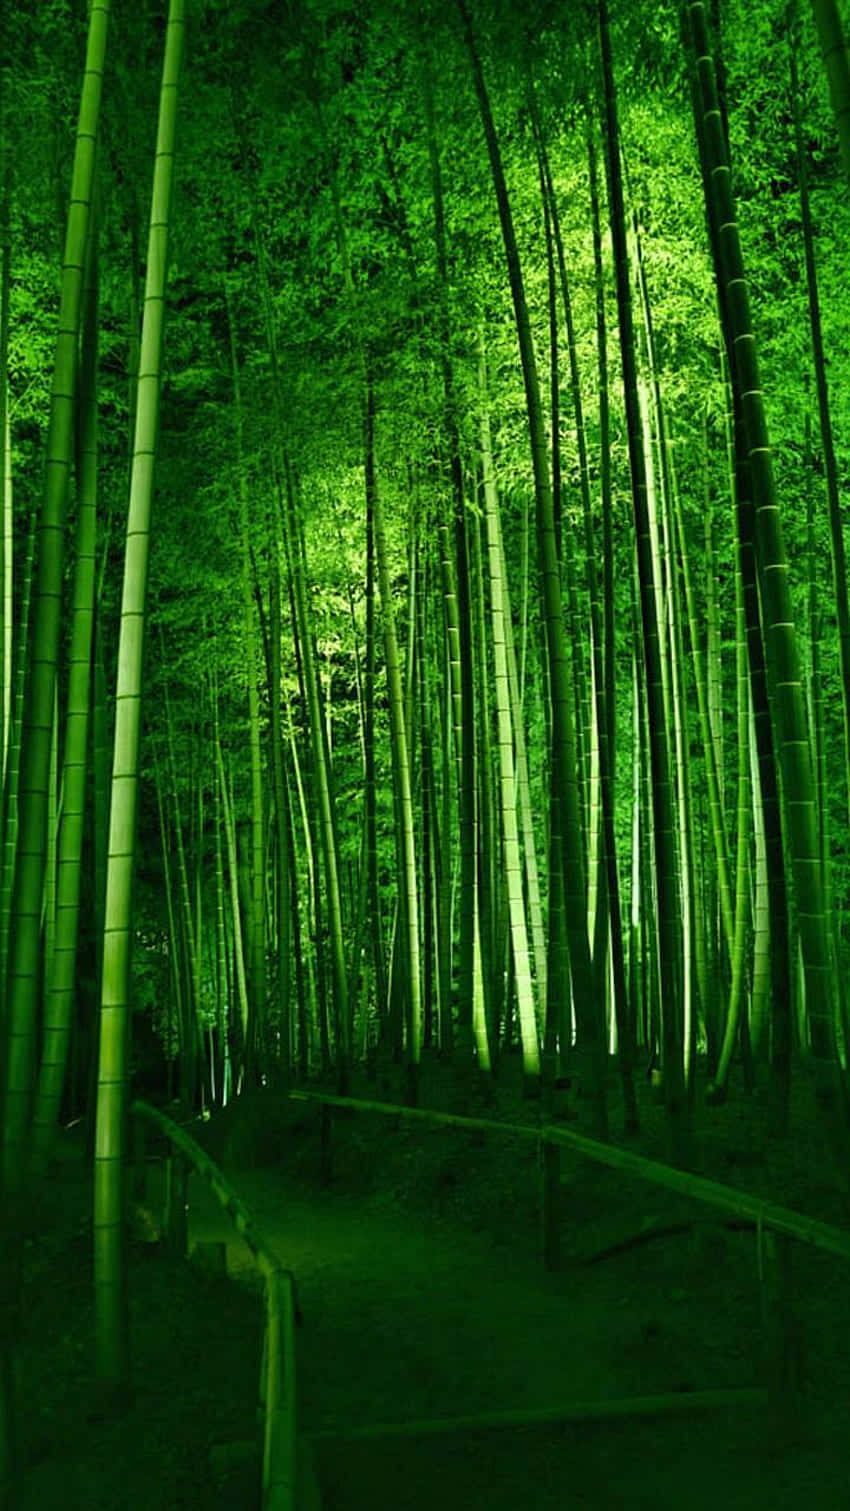 A Bamboo Forest Lit Up At Night Wallpaper